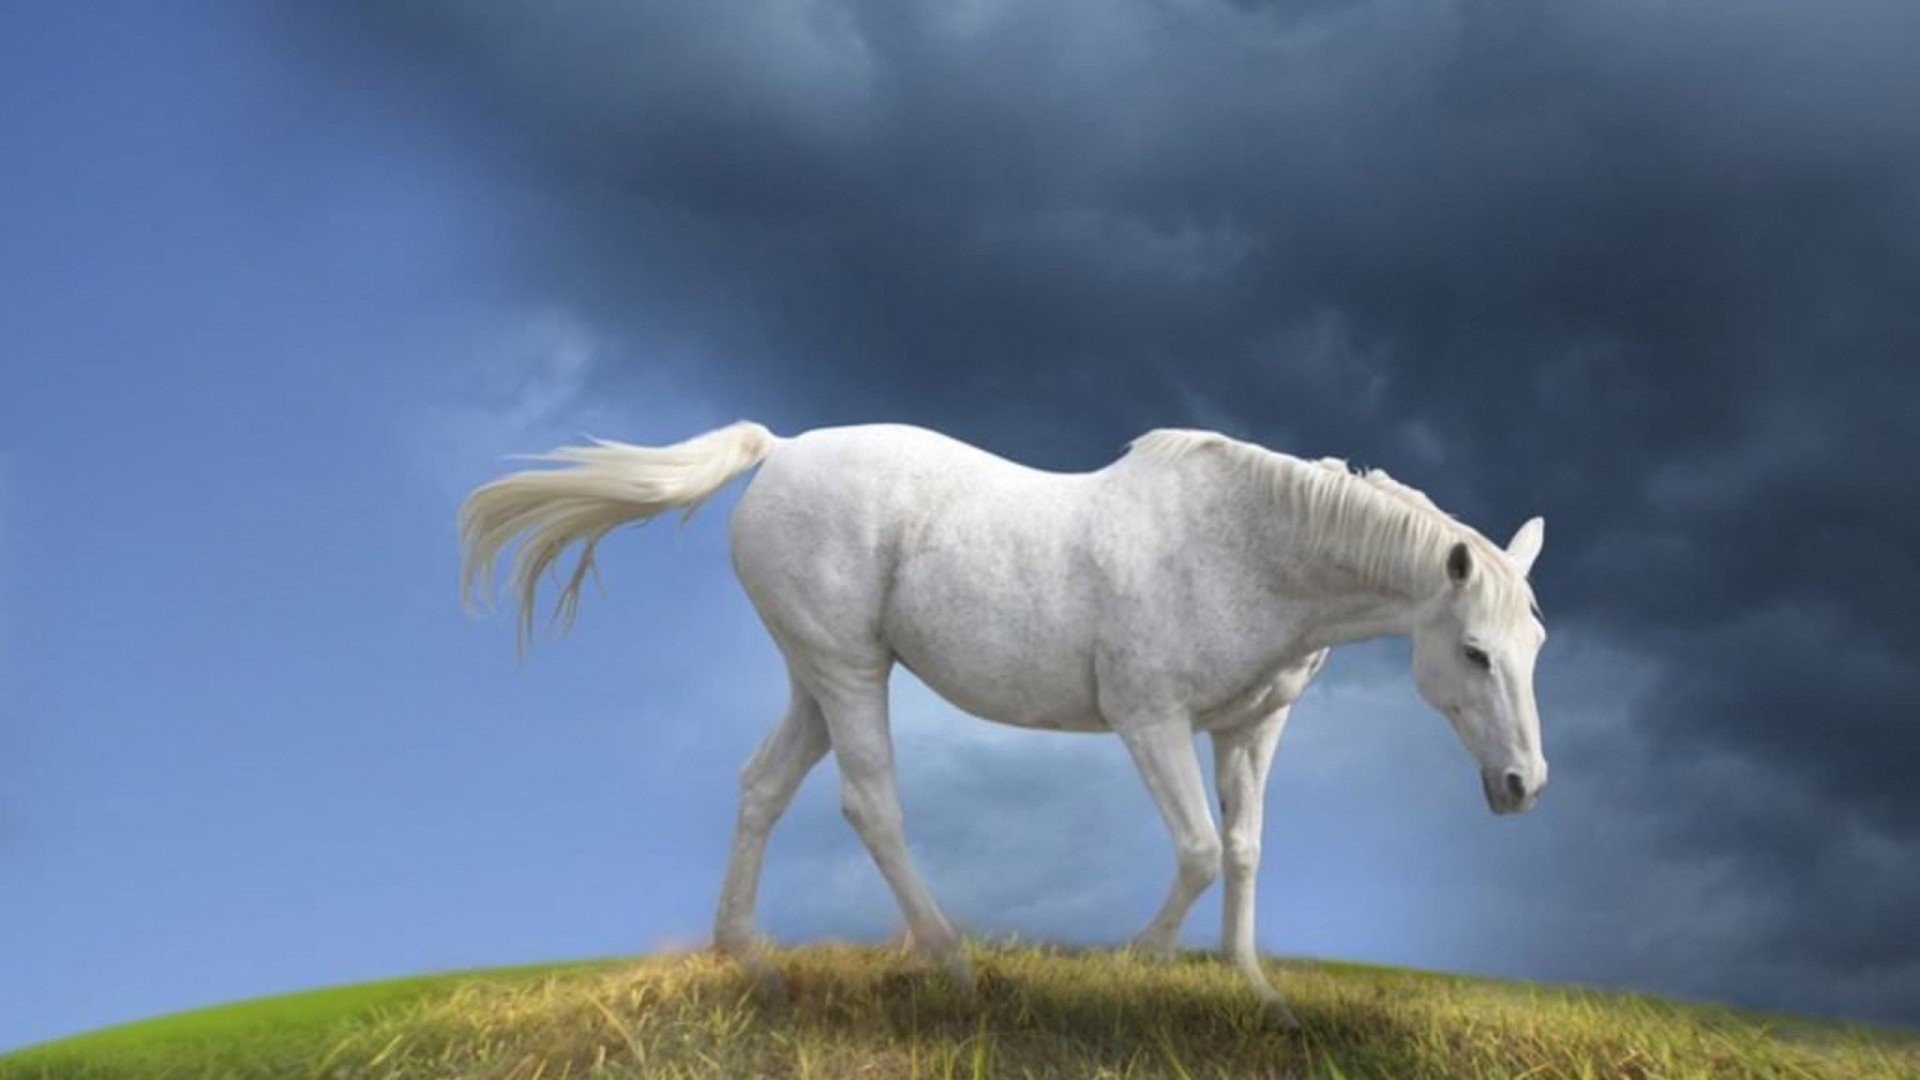 White Horse Wallpaper Hd 12751 Hd Wallpapers in Cars   Imagescicom 1920x1080